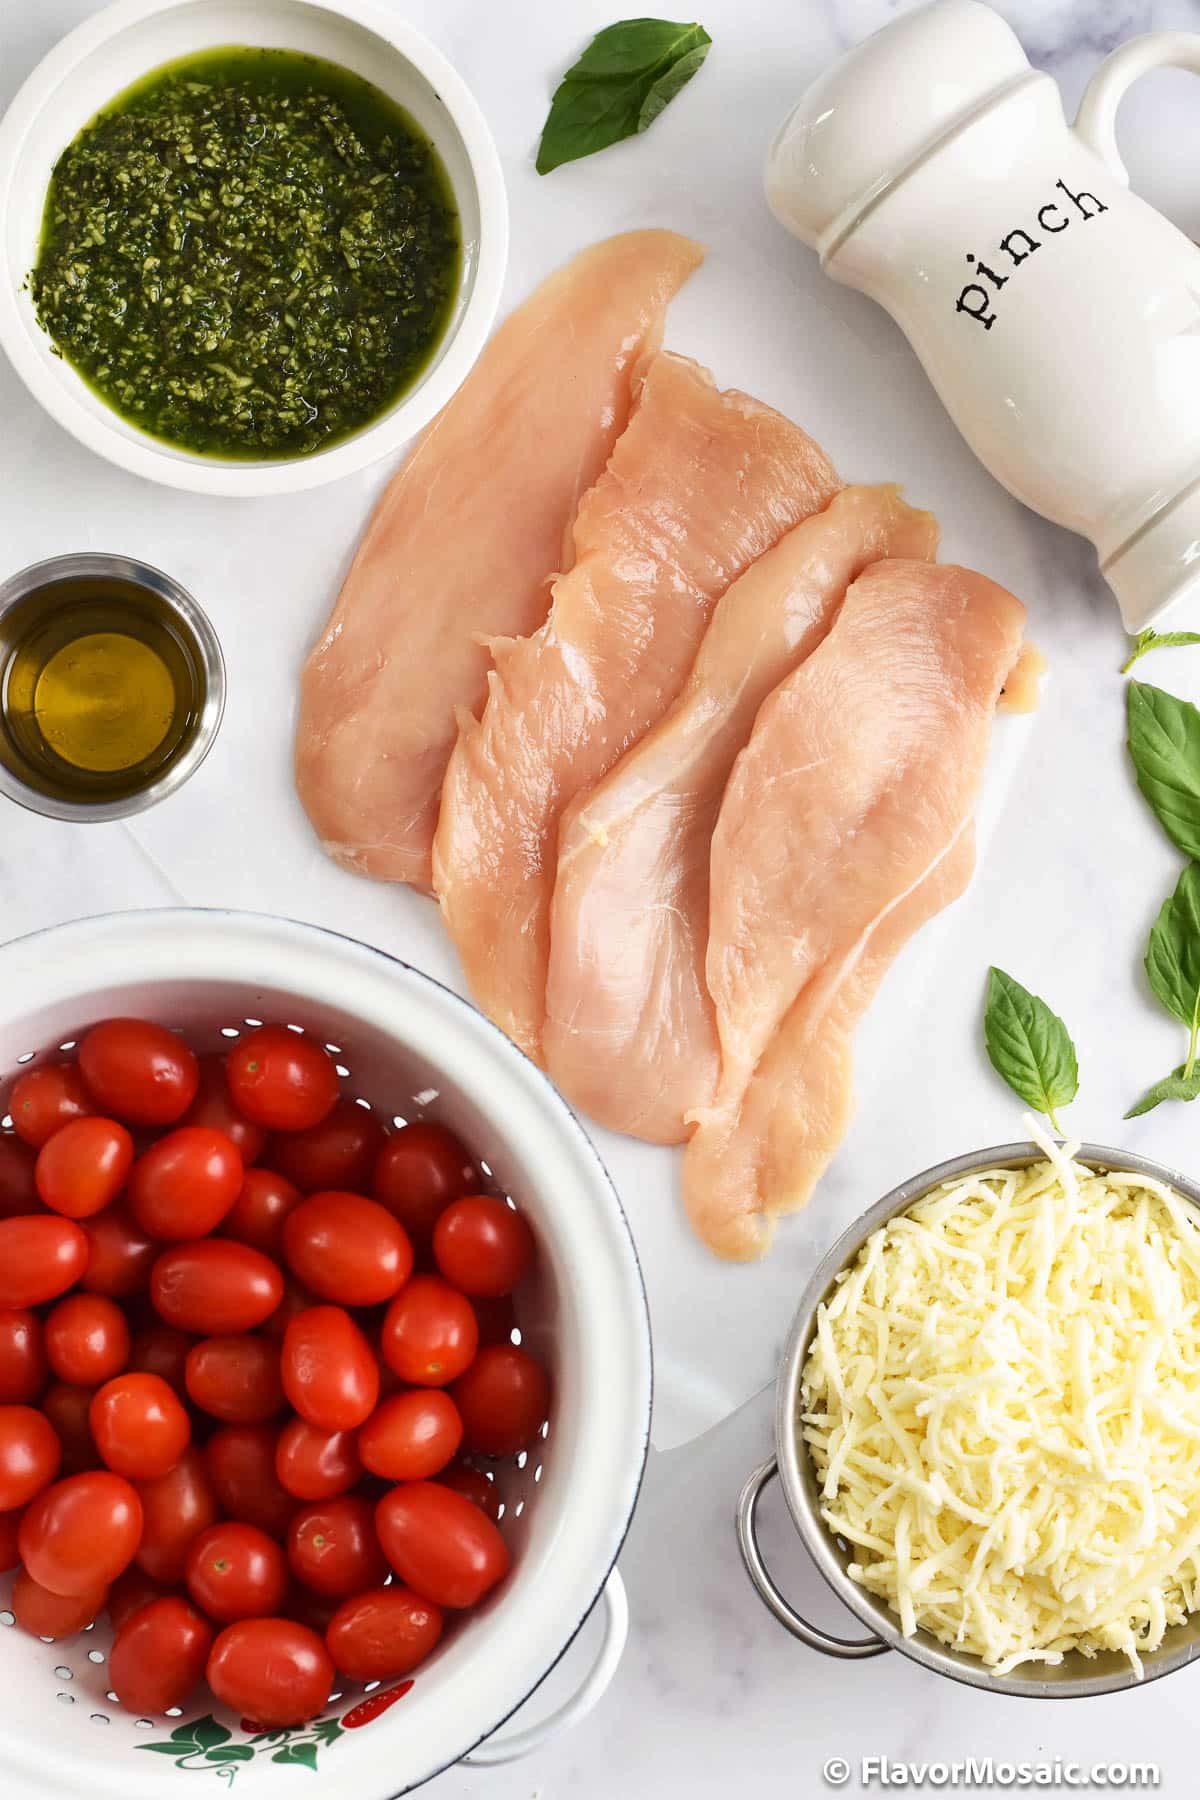 Overhead view of the ingredients for Baked Pesto Chicken on a white background.